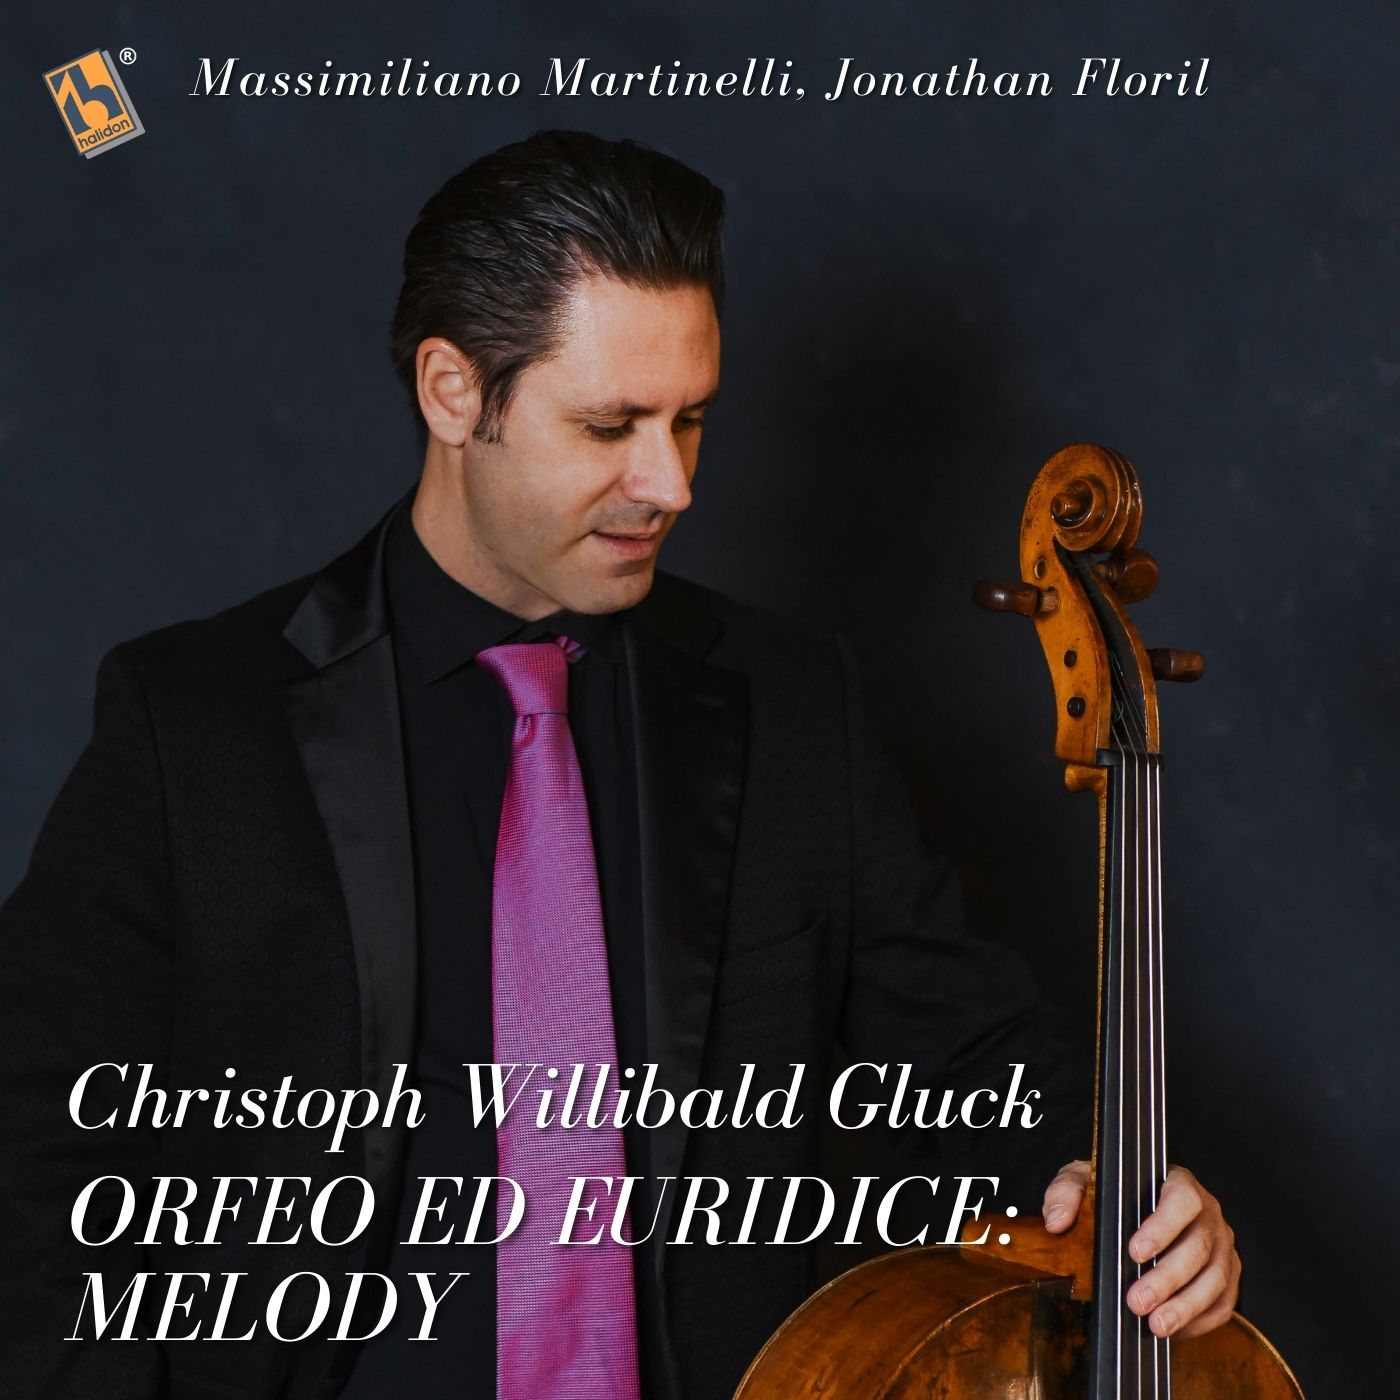 Gluck: Orfeo ed Euridice, Wq. 30: “Melody” (Arr. for Cello and Piano by Orfeo Mandozzi) 